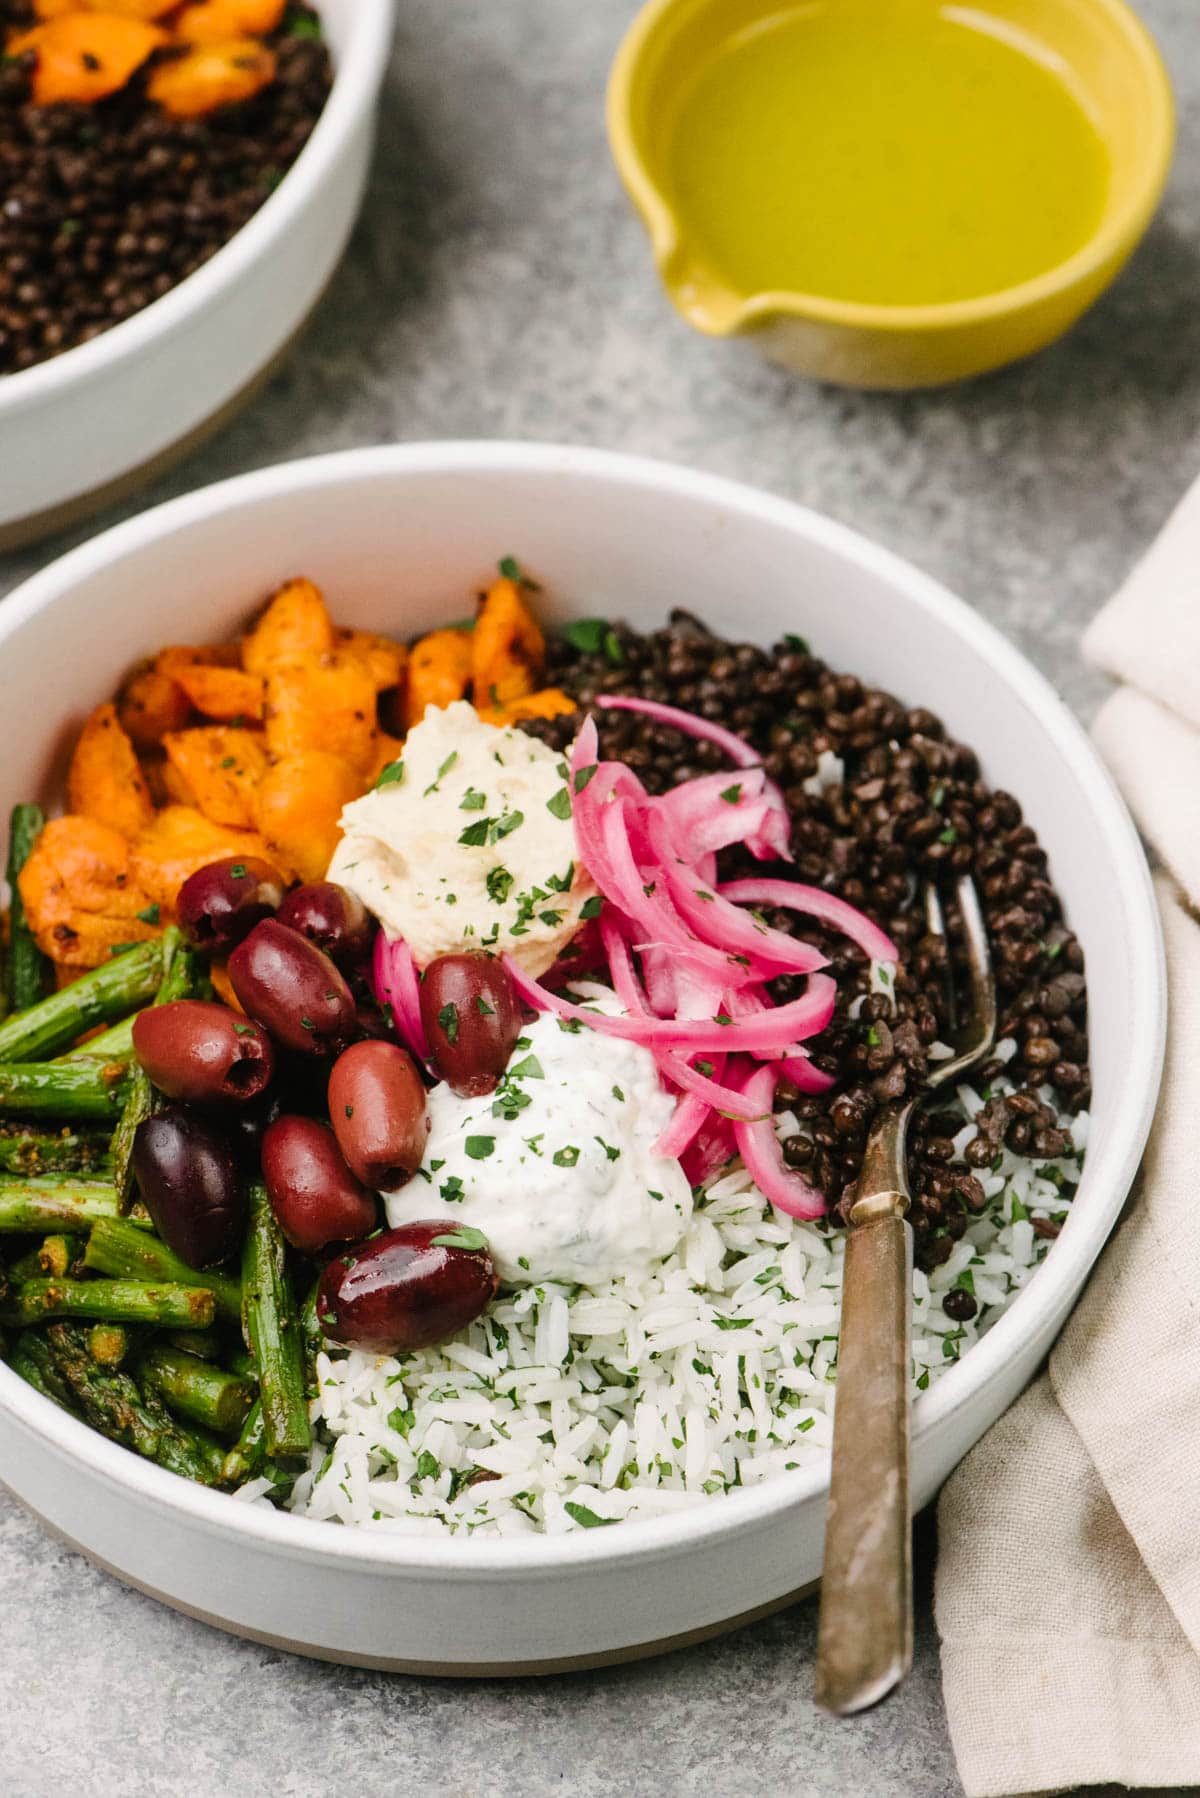 Side view, a fork tucked into a low serving bowl filled with black lentils, herbed rice, and roasted vegetables topped with olives, pickled red onions, and hummus; a cream linen napkin and small yellow bowl with lemon vinaigrette surround the bowl.